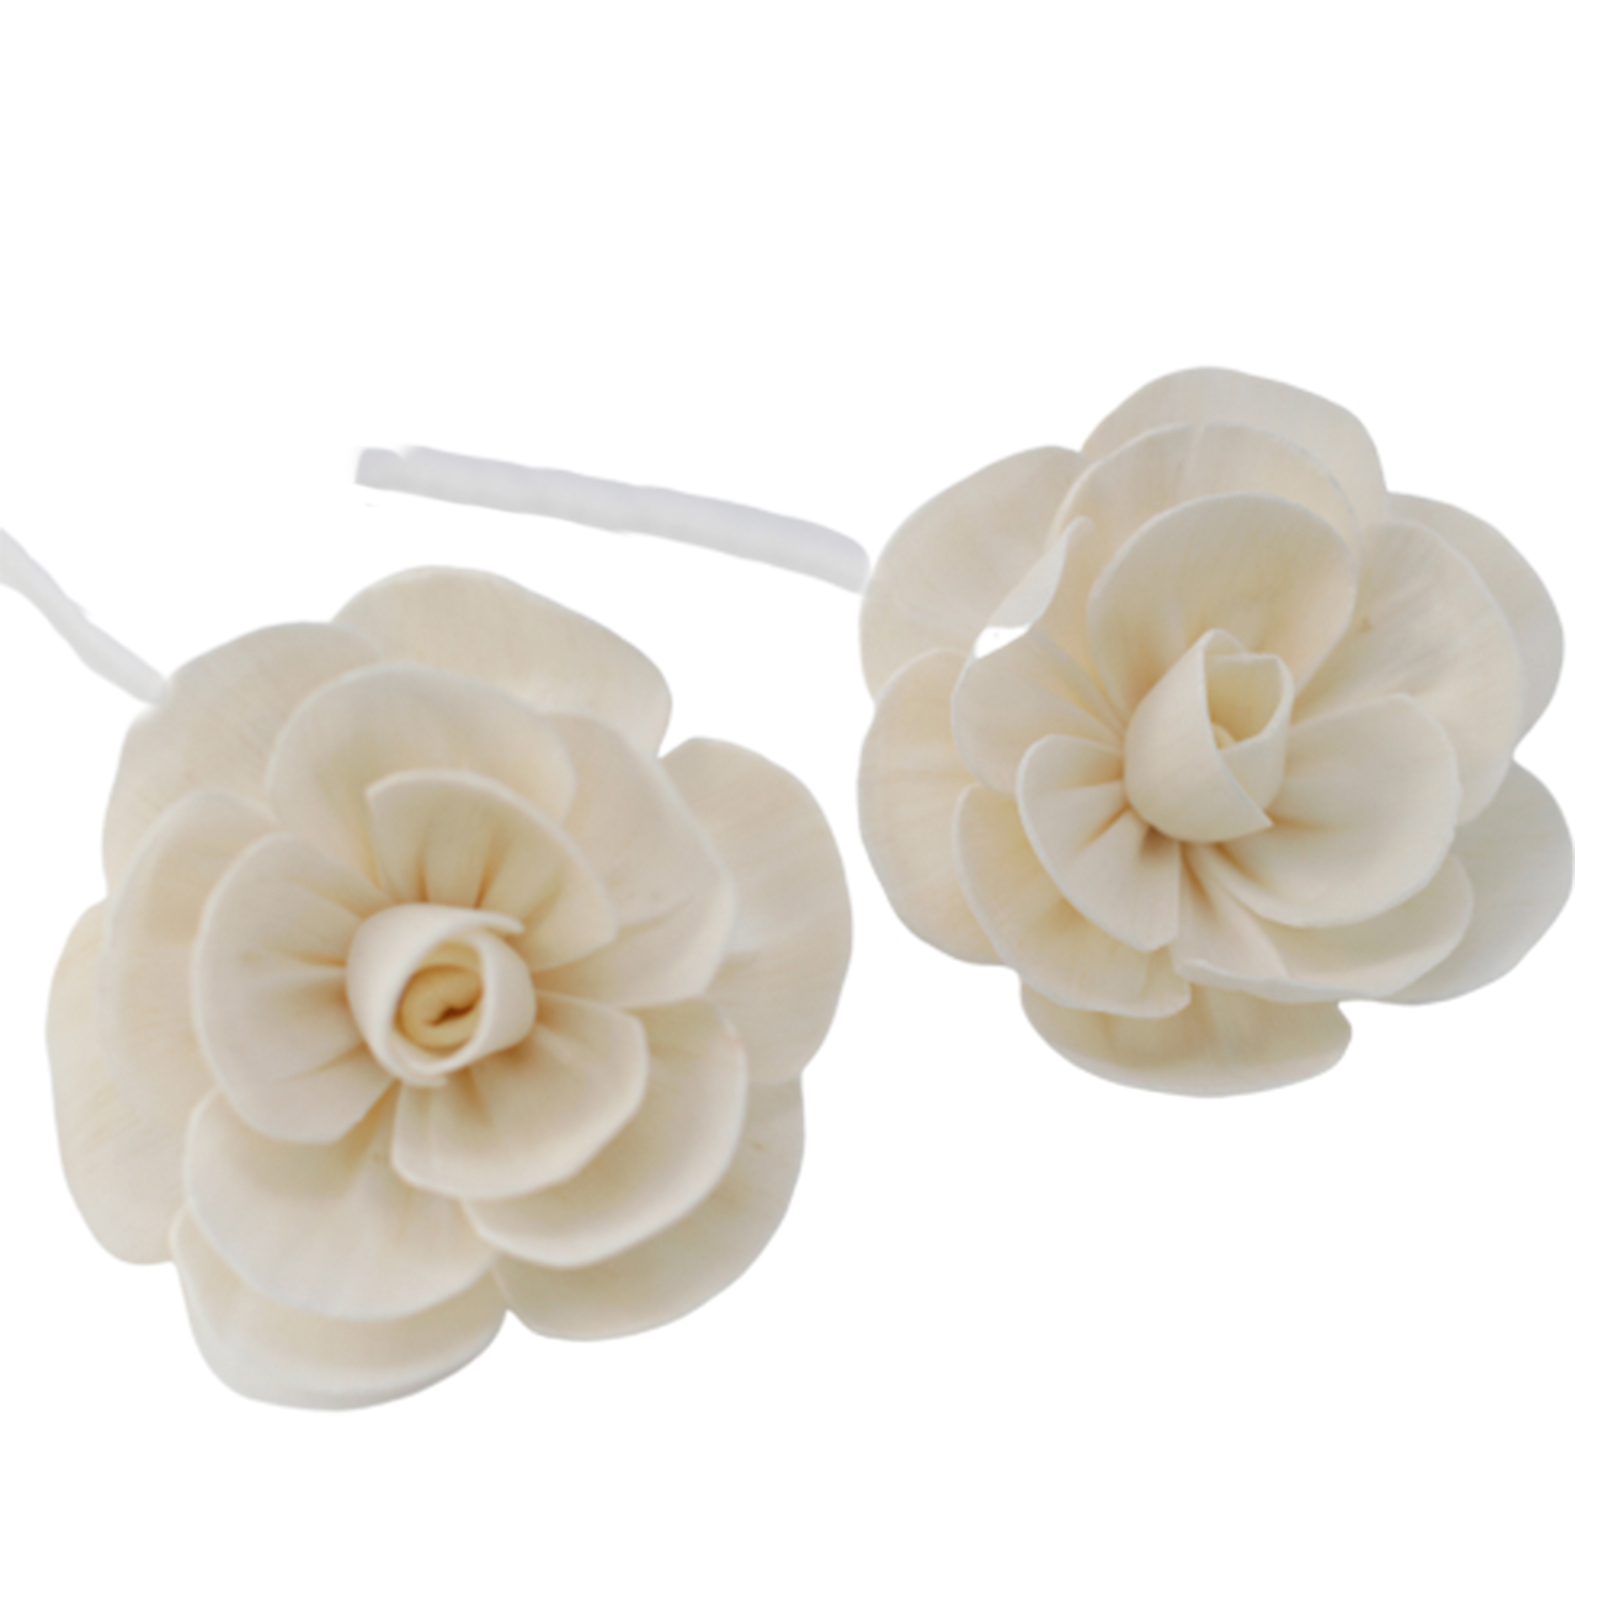 12 x Natural Diffuser Flowers - Large Lotus on String - Click Image to Close